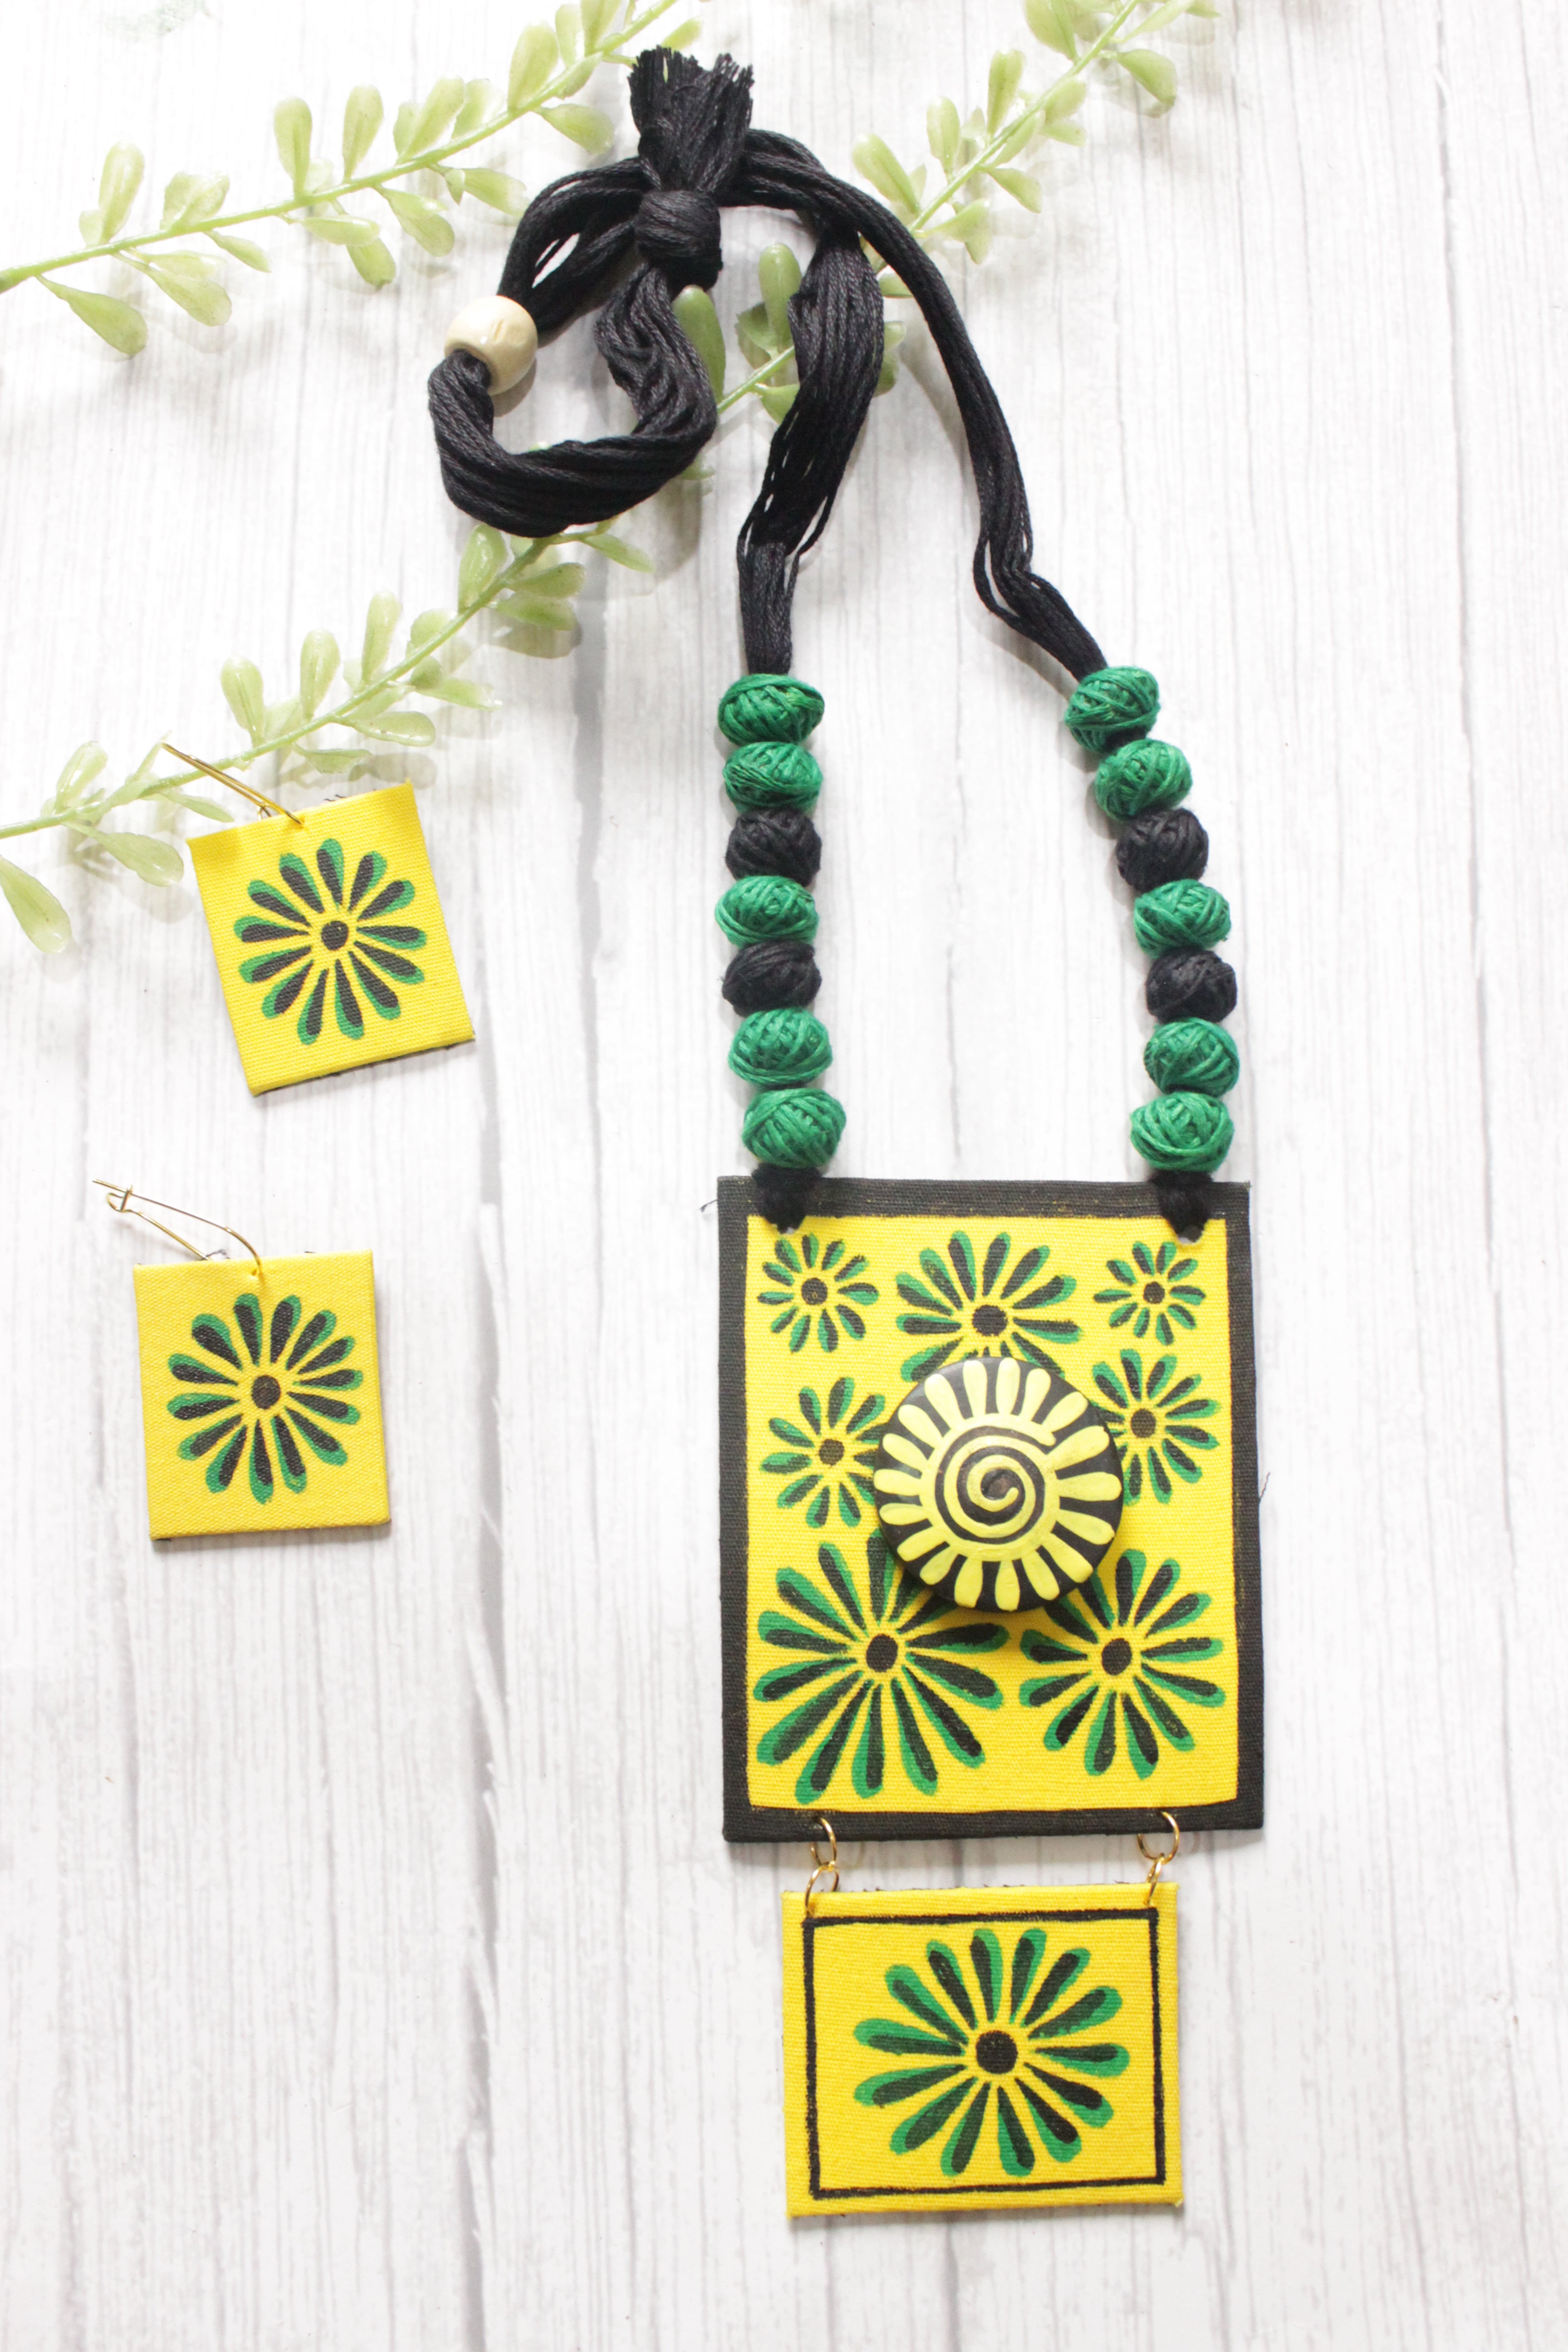 Flower Painted Vibrant Yellow and Green Fabric Choker Necklace Set with Adjustable Thread Closure